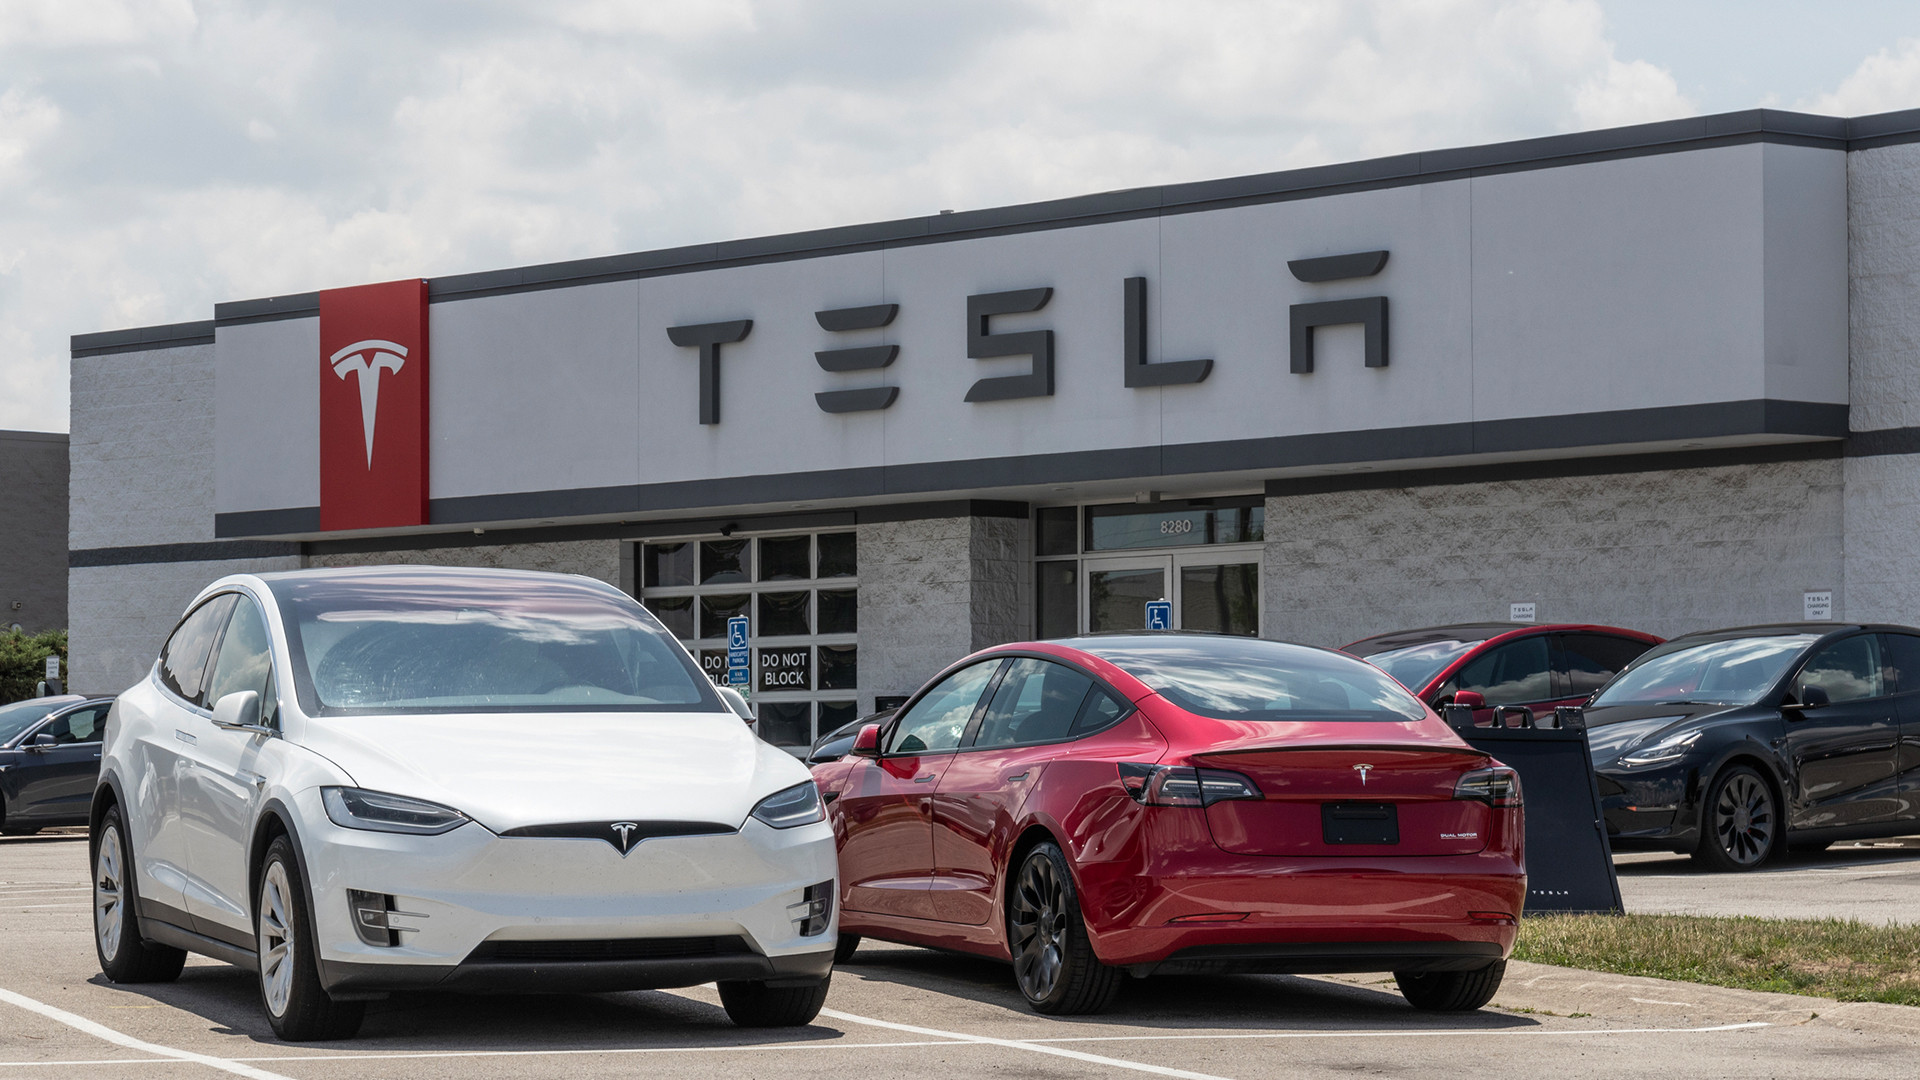 Tesla’s Strategy for Inexpensive Automobiles Borrows Ideas From Competitors in Detroit